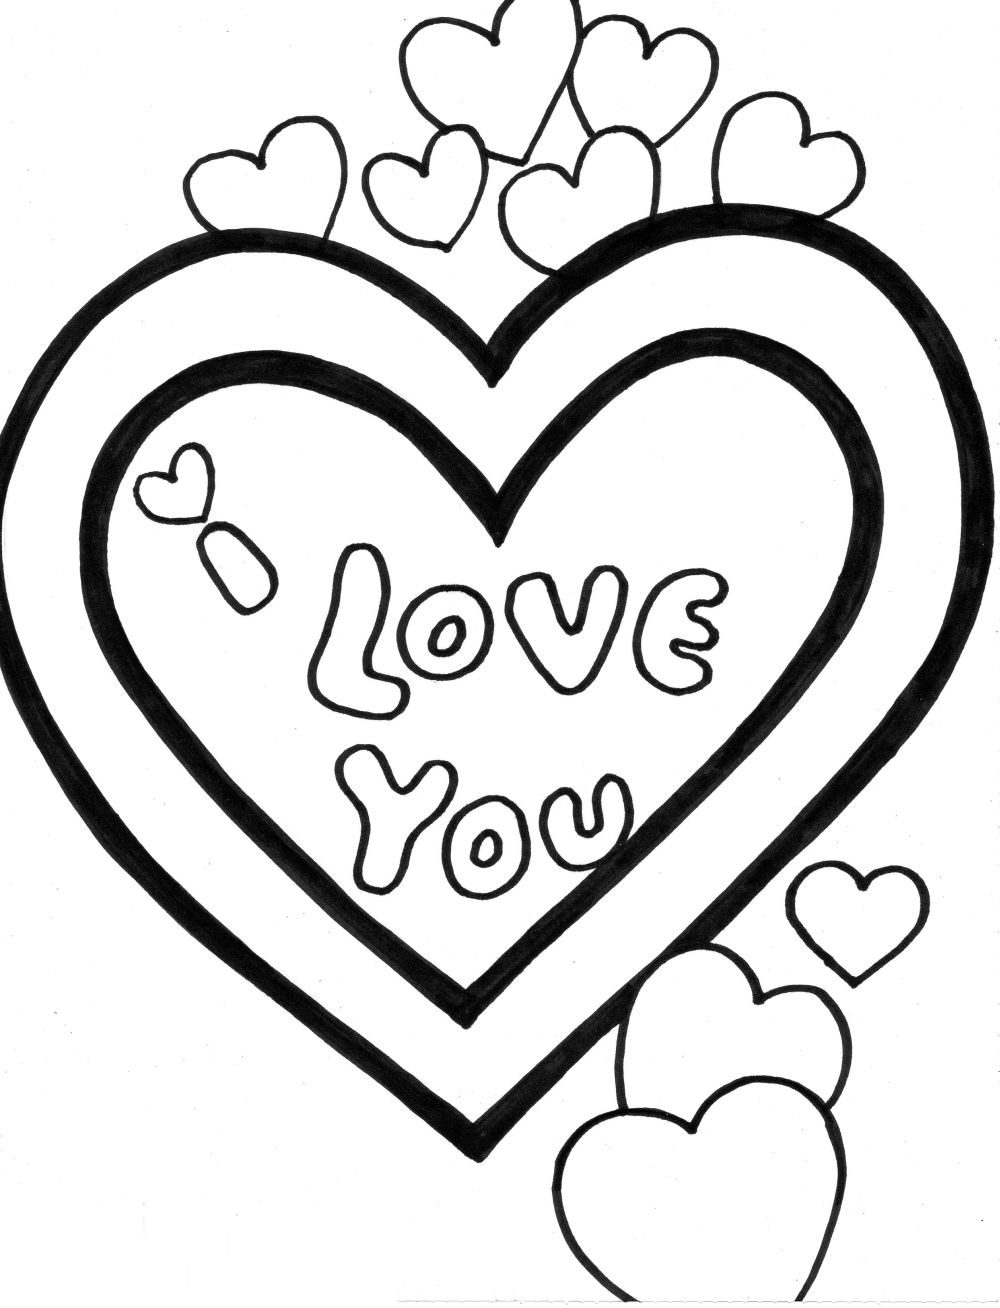 "I Love You " Coloring Pages >> Disney Coloring Pages